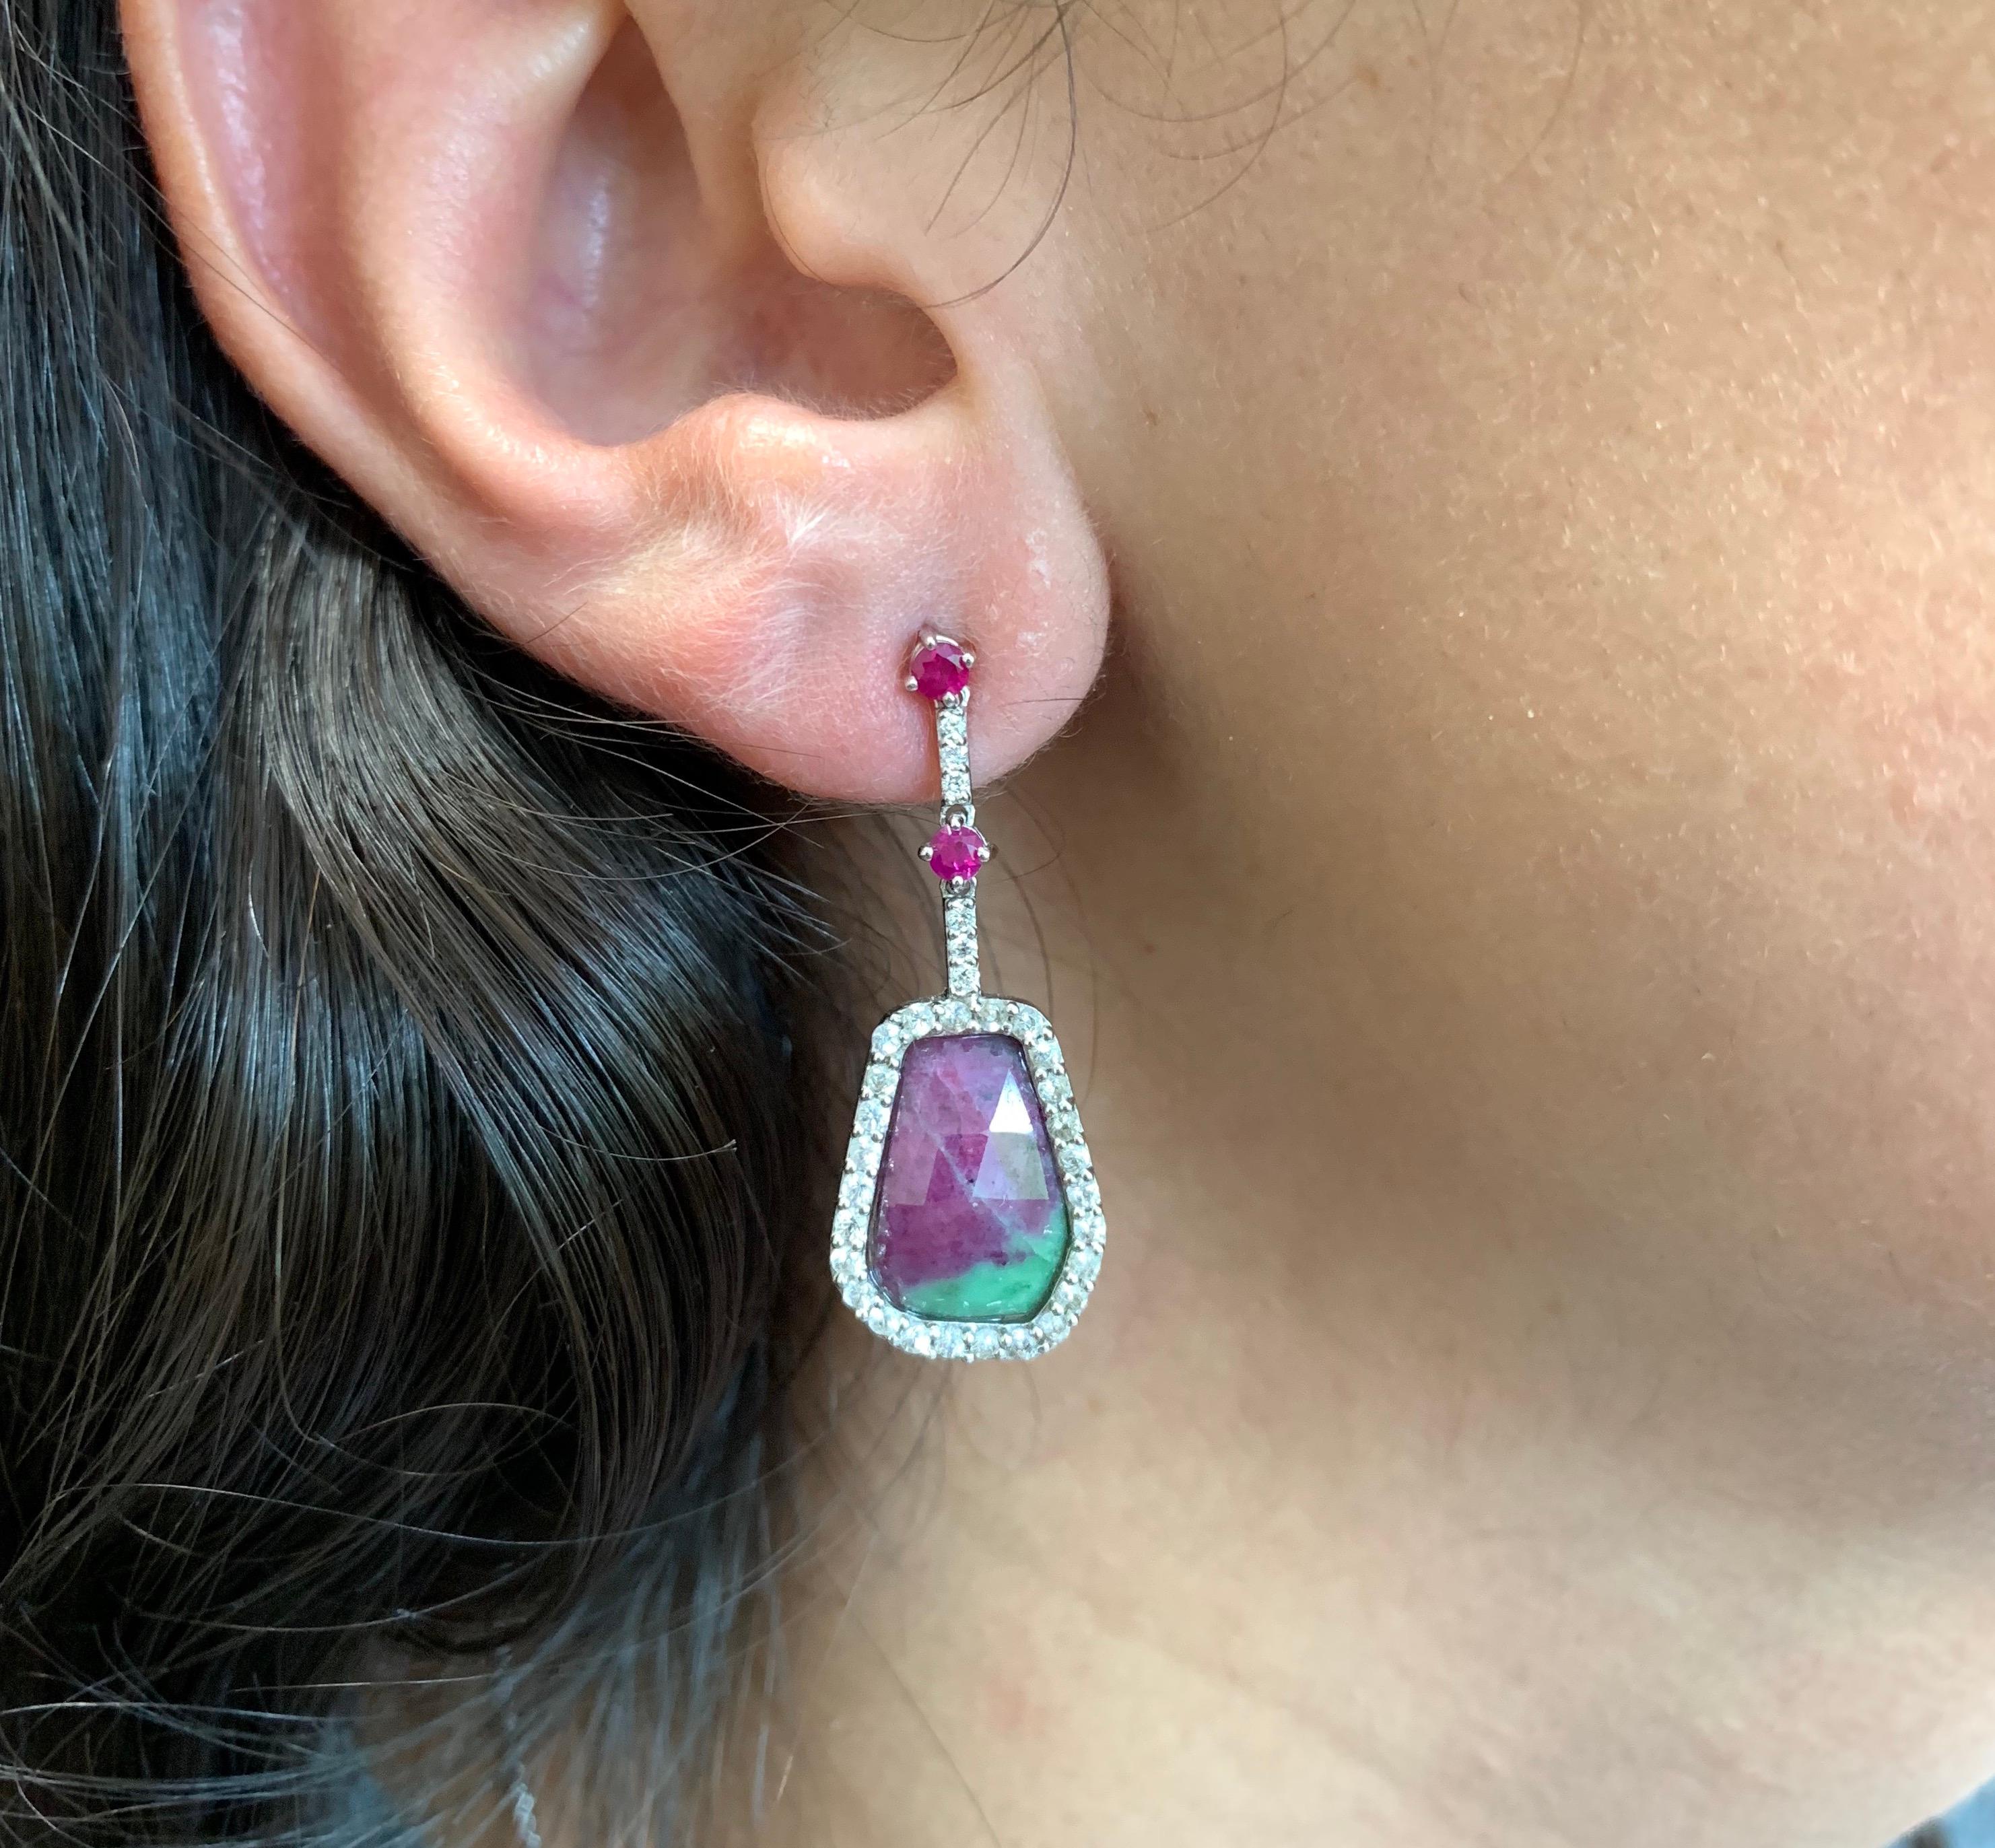 Material: 14k White Gold 
Center Stone Details: 2 Hexagon Shaped Ruby-Zoisites at 7.84 Carats Total - Measuring 12.8 x 9.4 mm
Stone Details: 4 Round Rubies at 0.32 Carats 
Stone Details: 54 Round White Sapphires at 0.77 Carats 
Diamond Details: 12